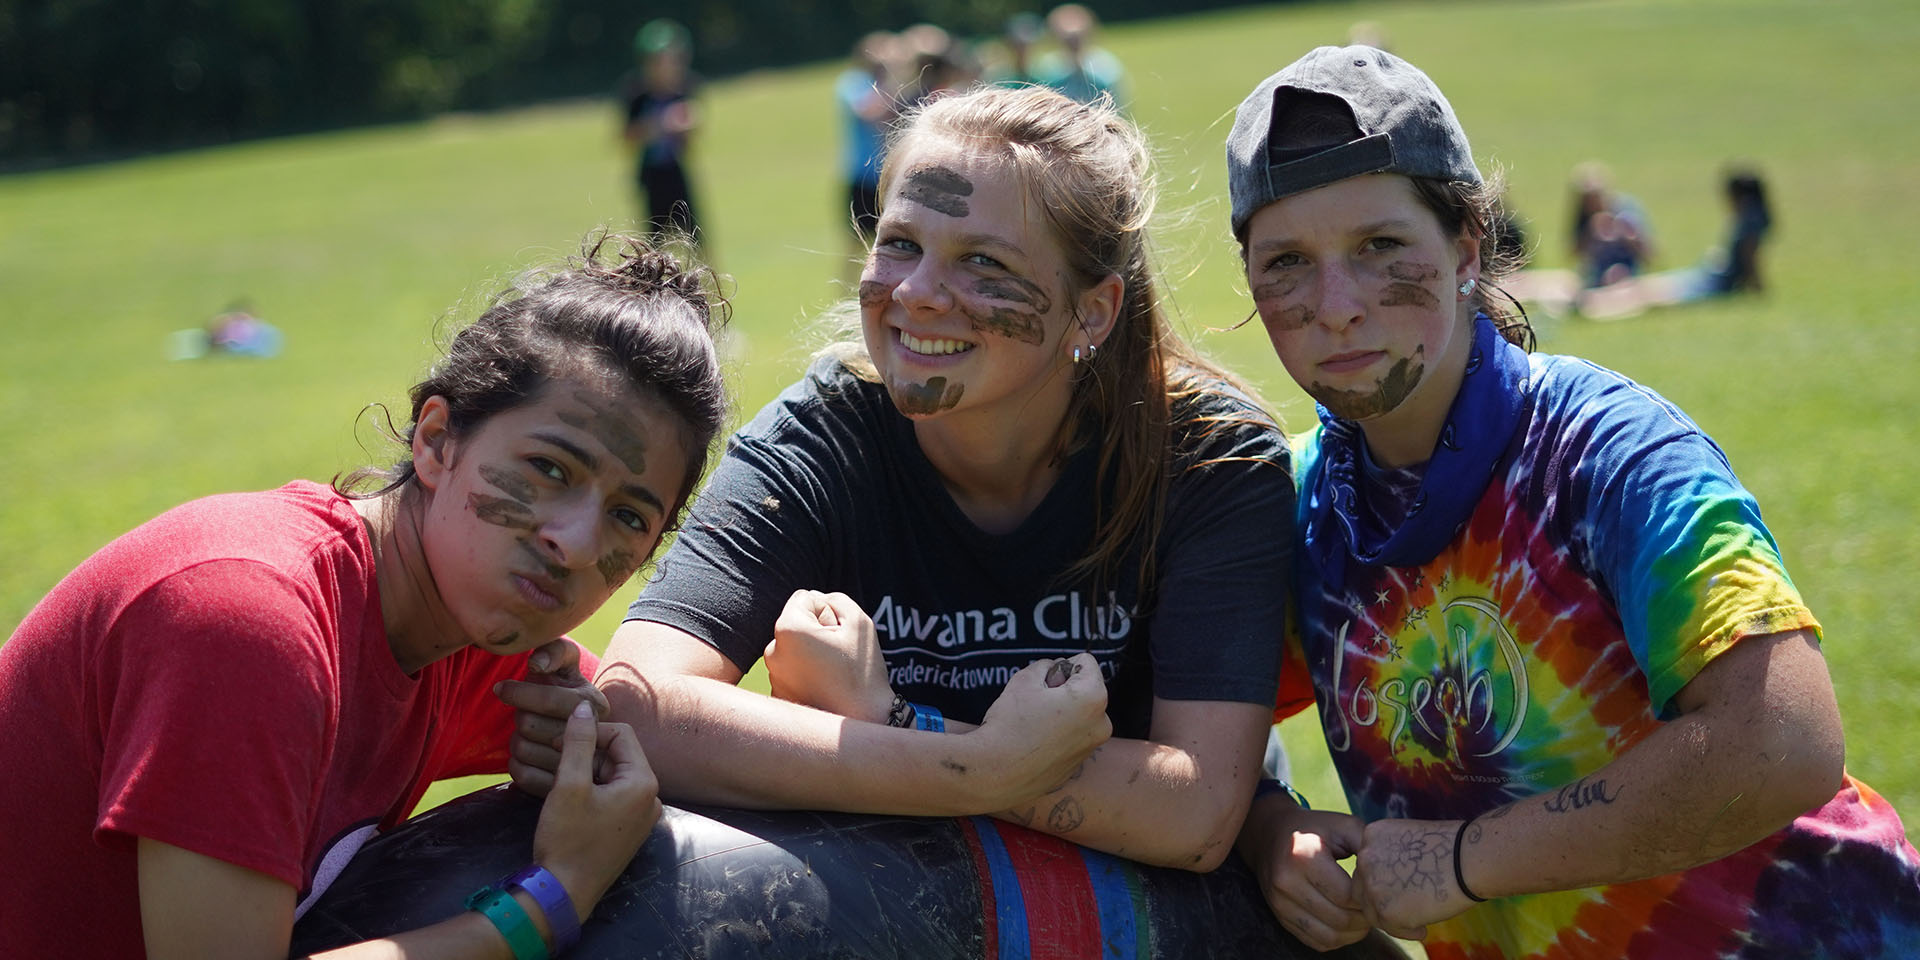 Three campers pose together with mud painted on their faces.